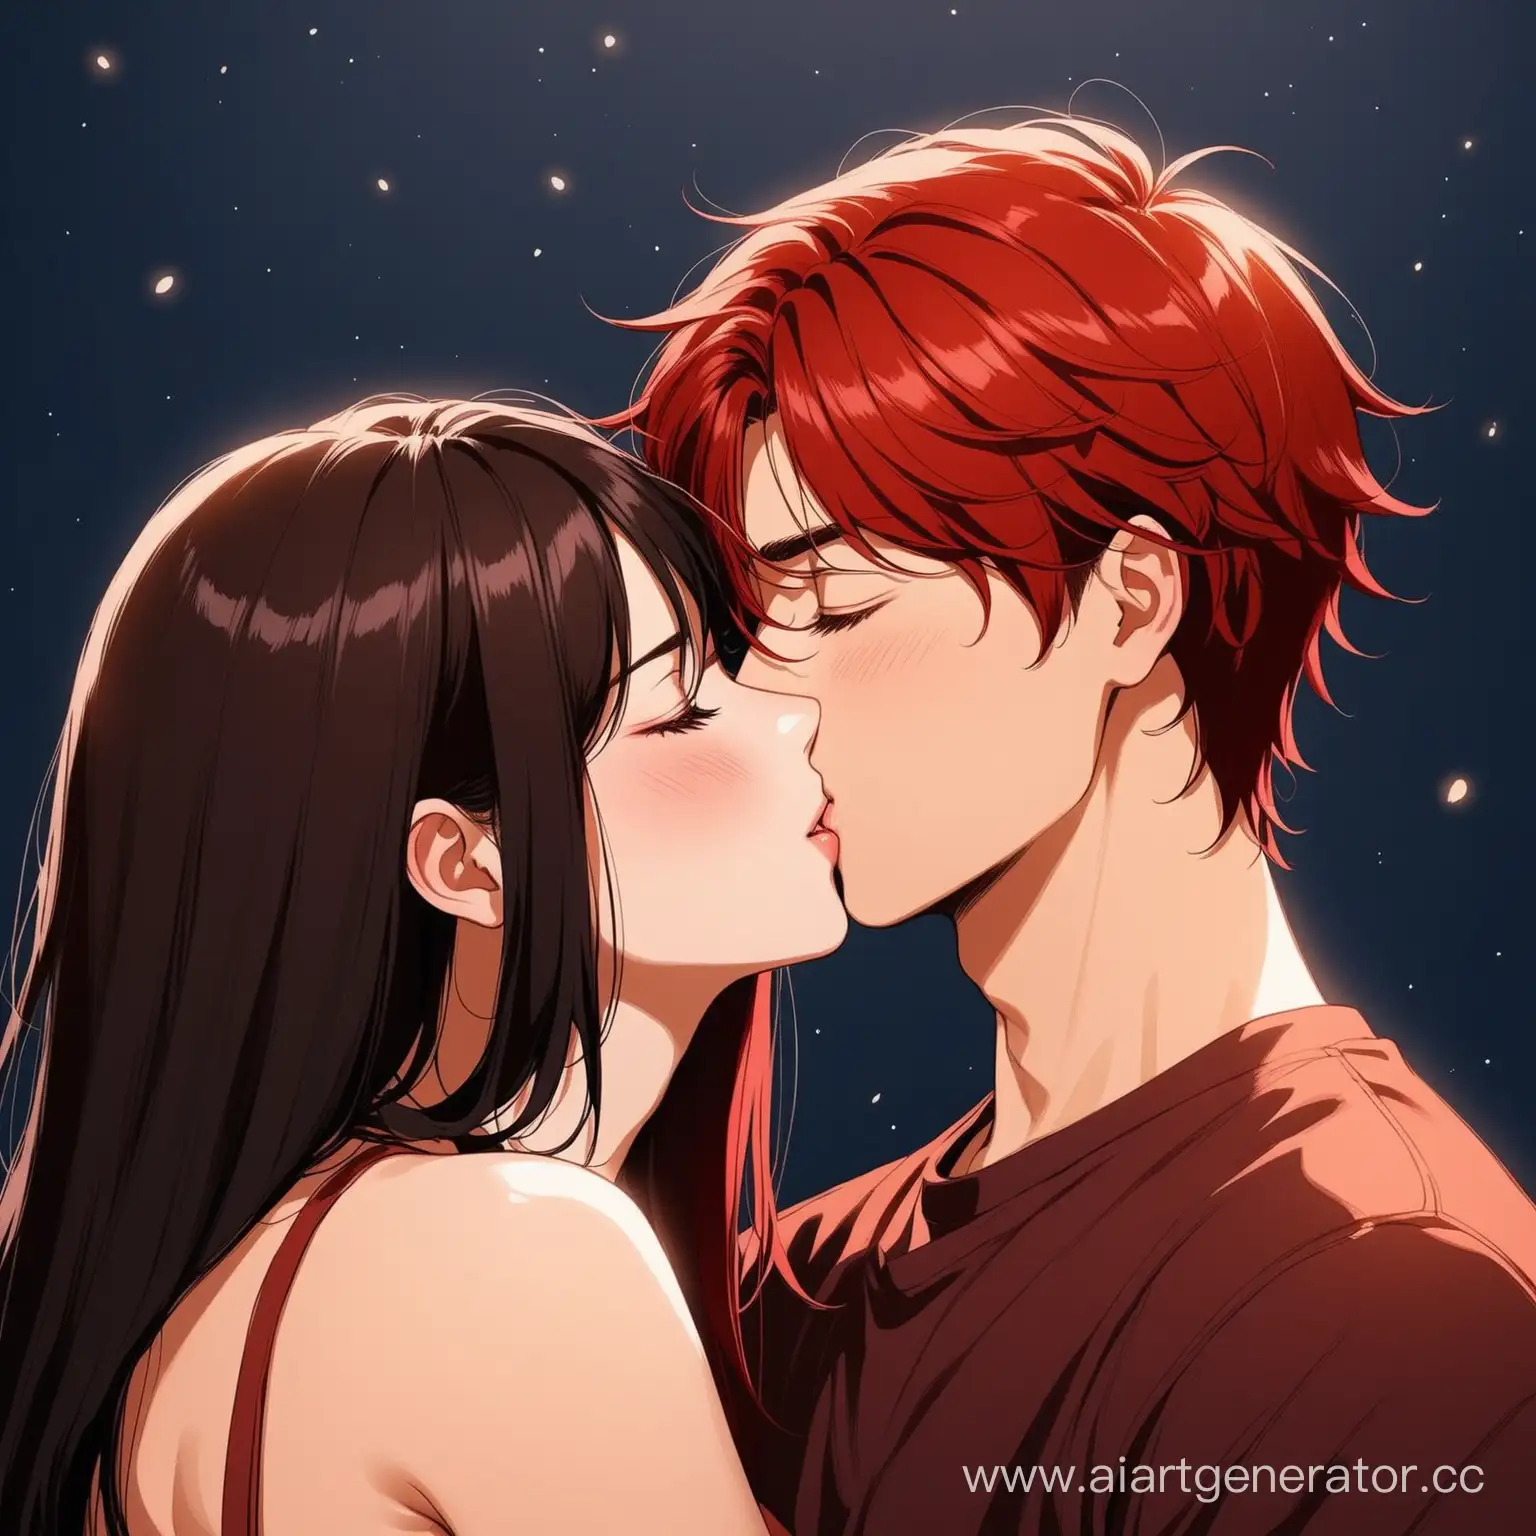 Romantic-RedHaired-Man-Kissing-DarkHaired-Woman-Tenderly